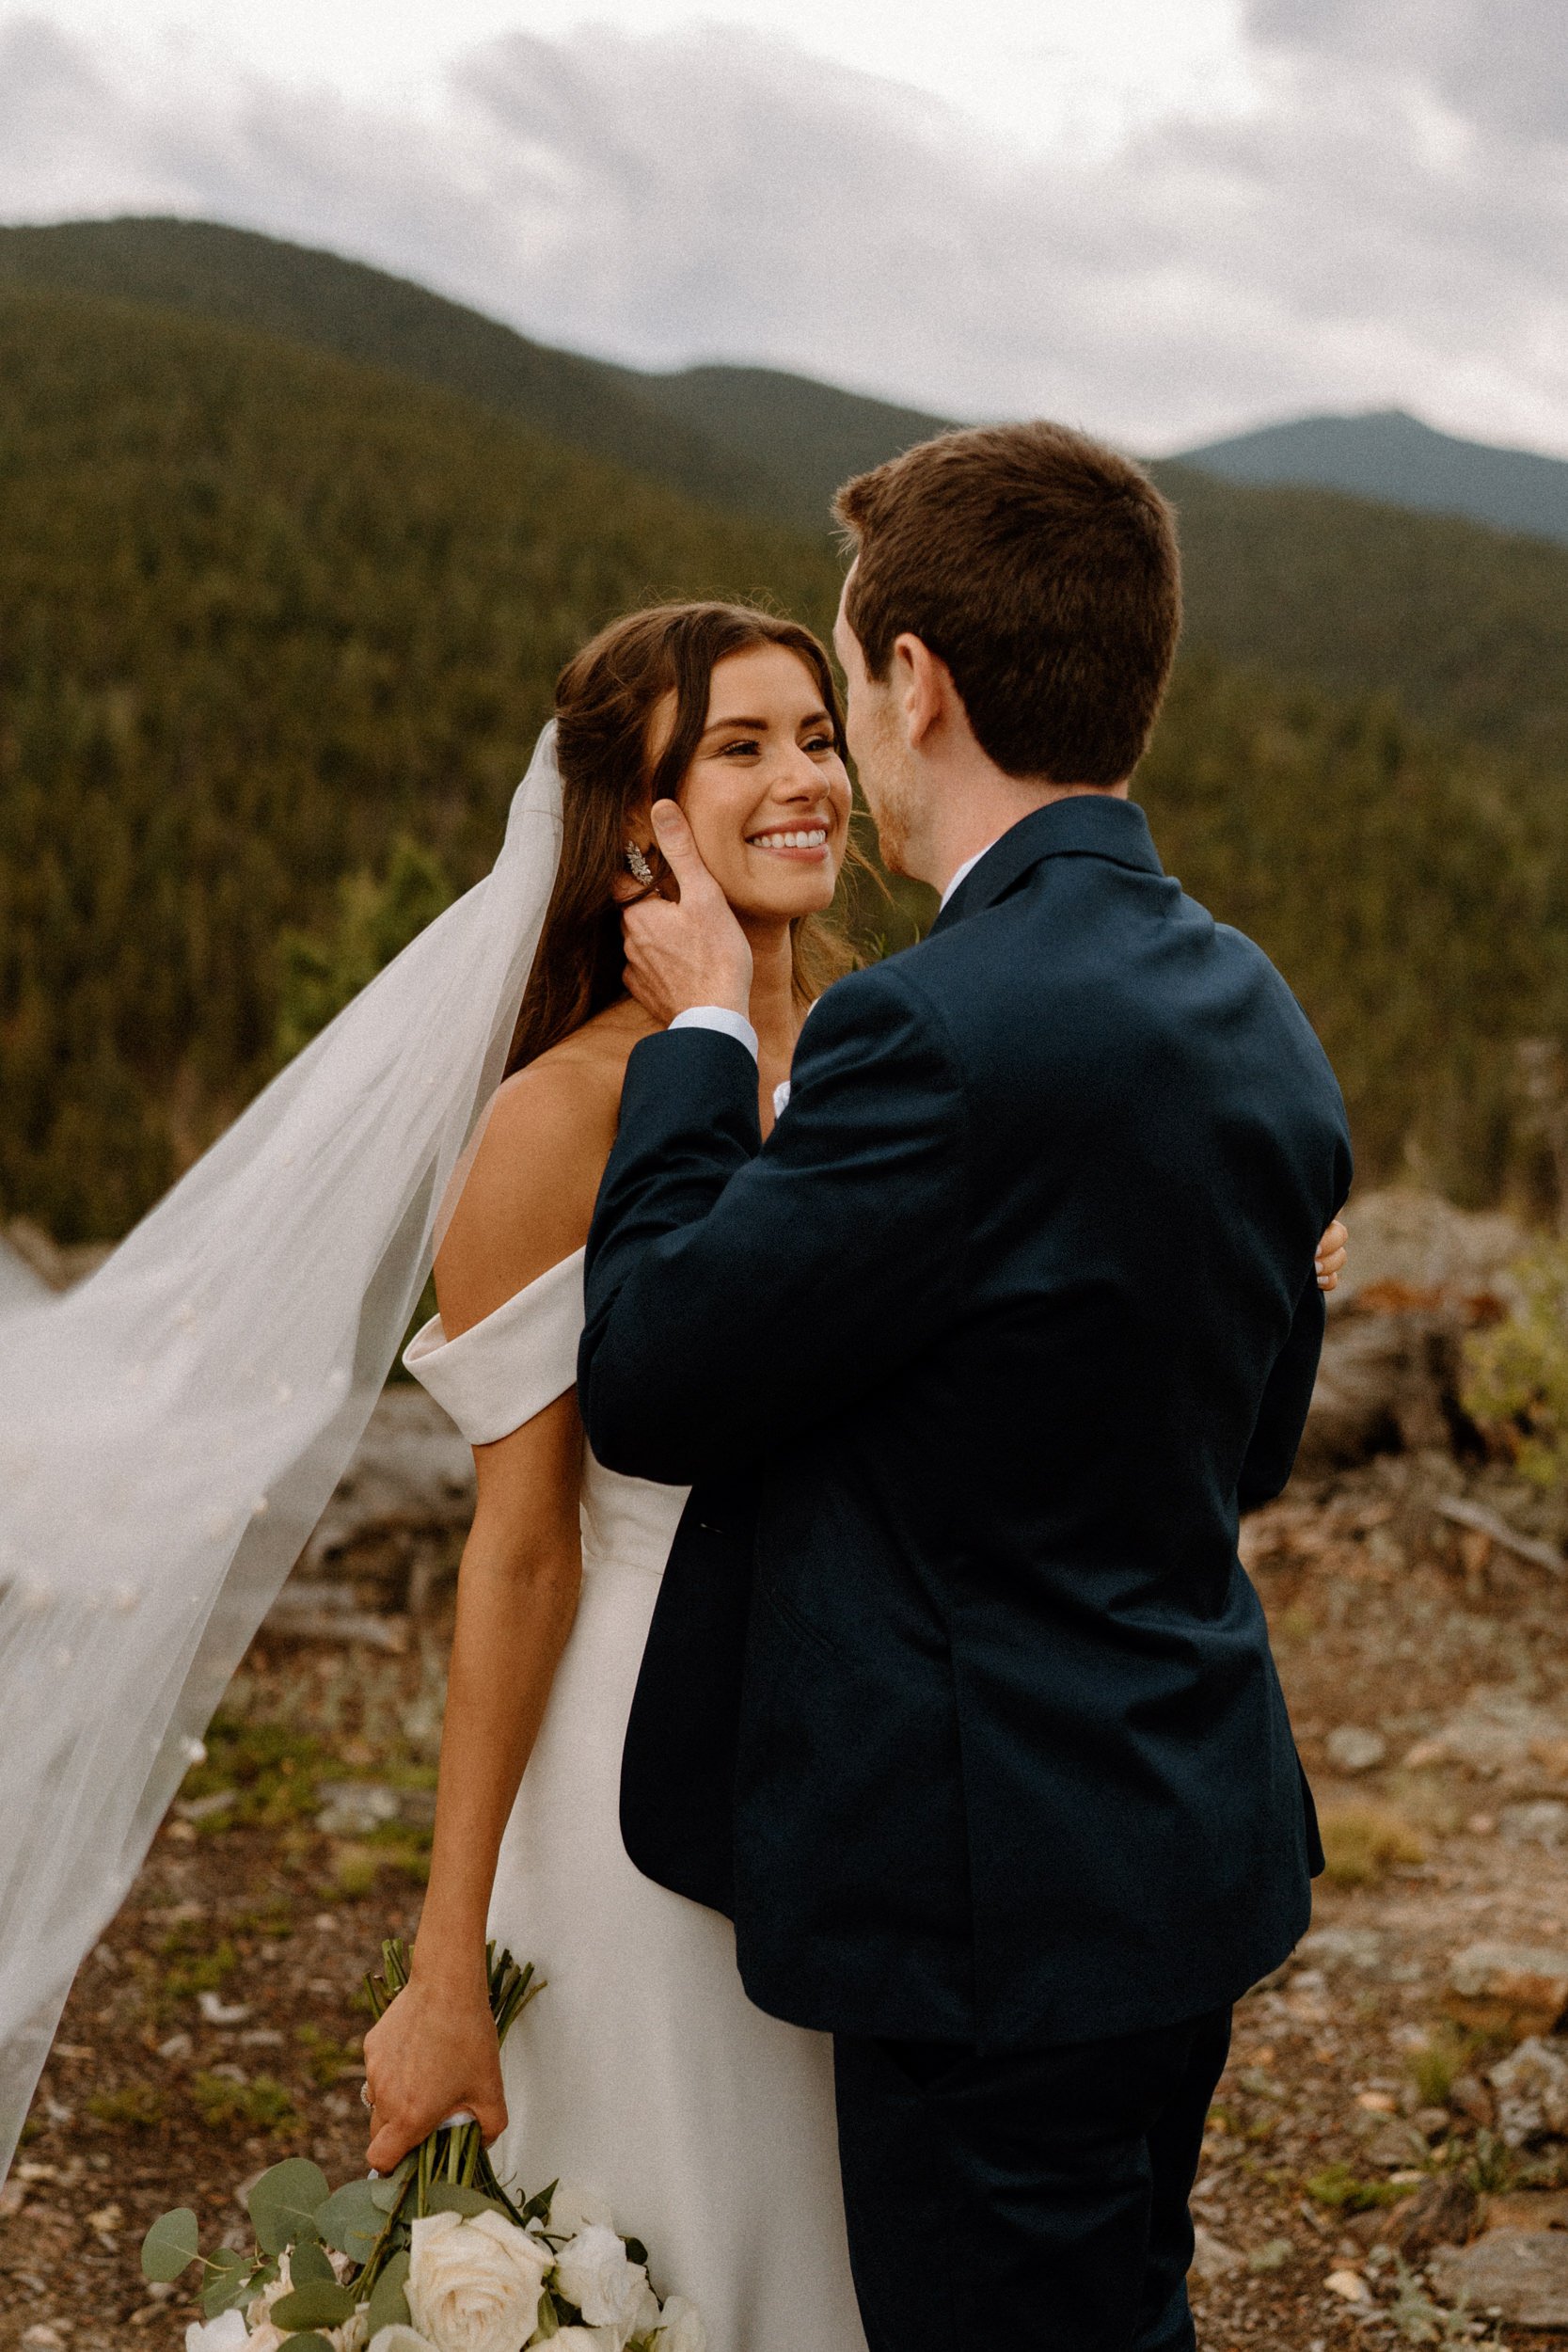 The bride smiles back at the groom as he holds her face at North Star Gatherings in Idaho Springs, CO